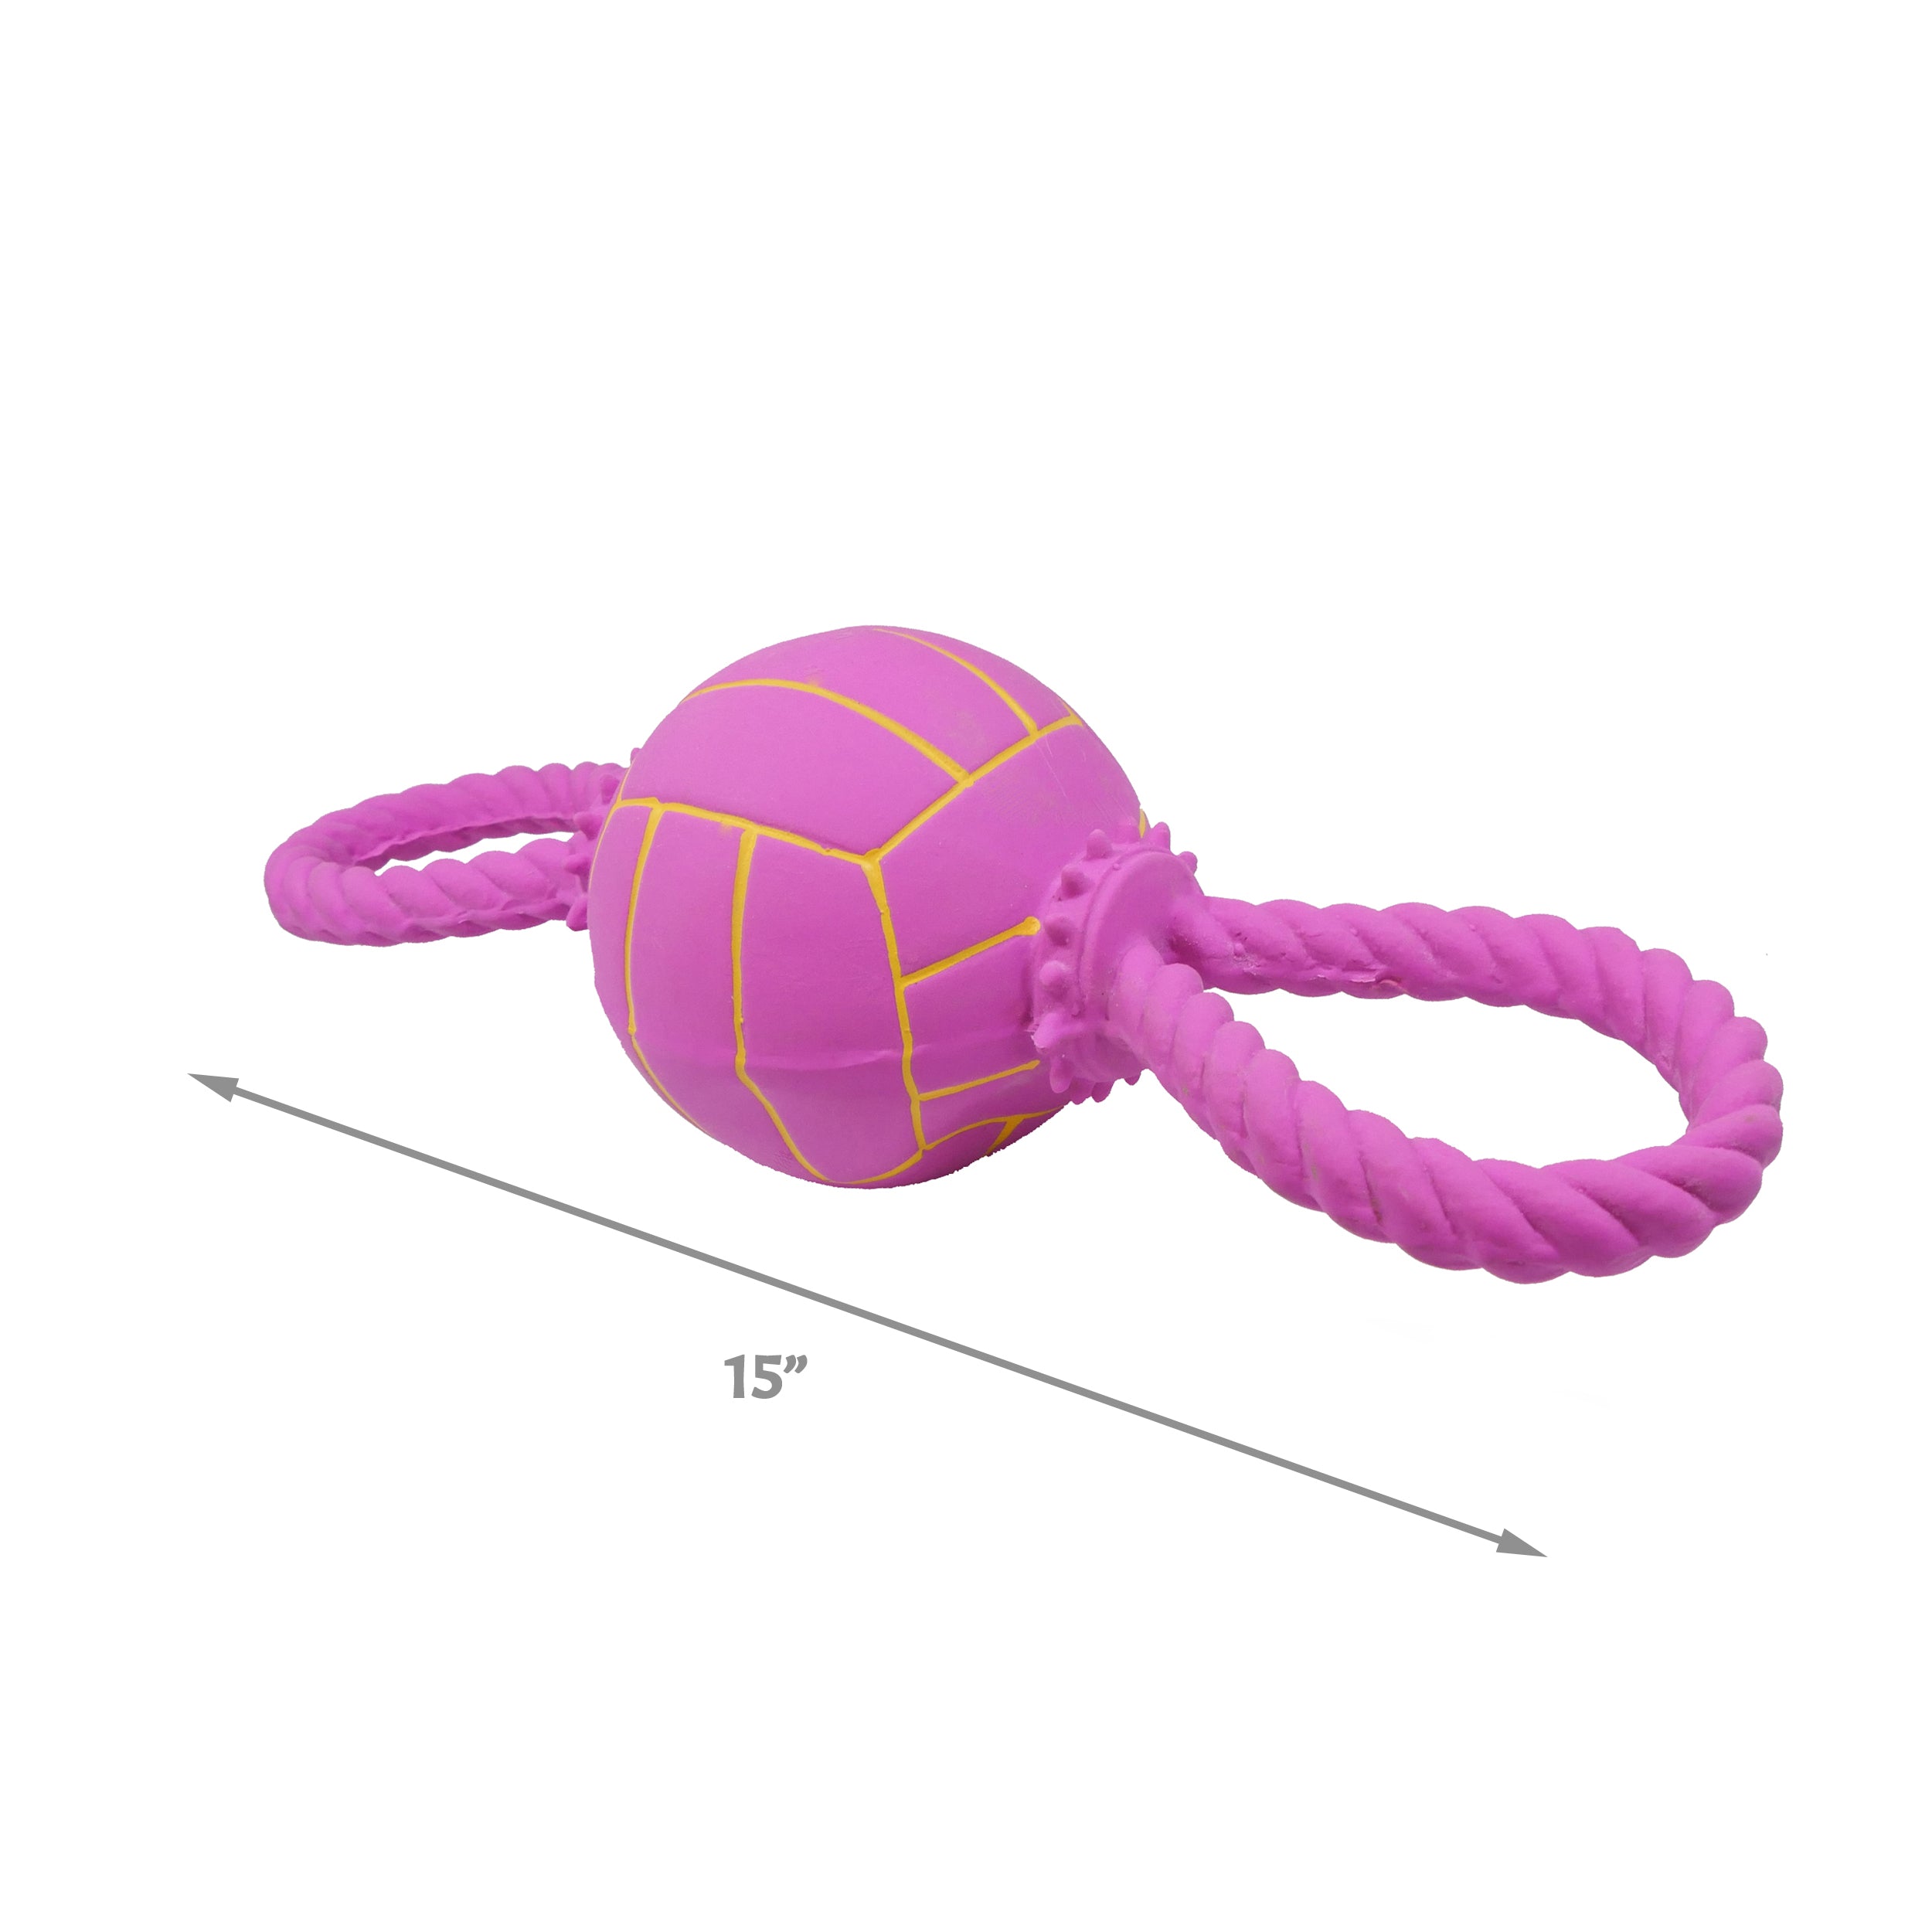 [Dog toy] 2-color rubber softball with two side handles